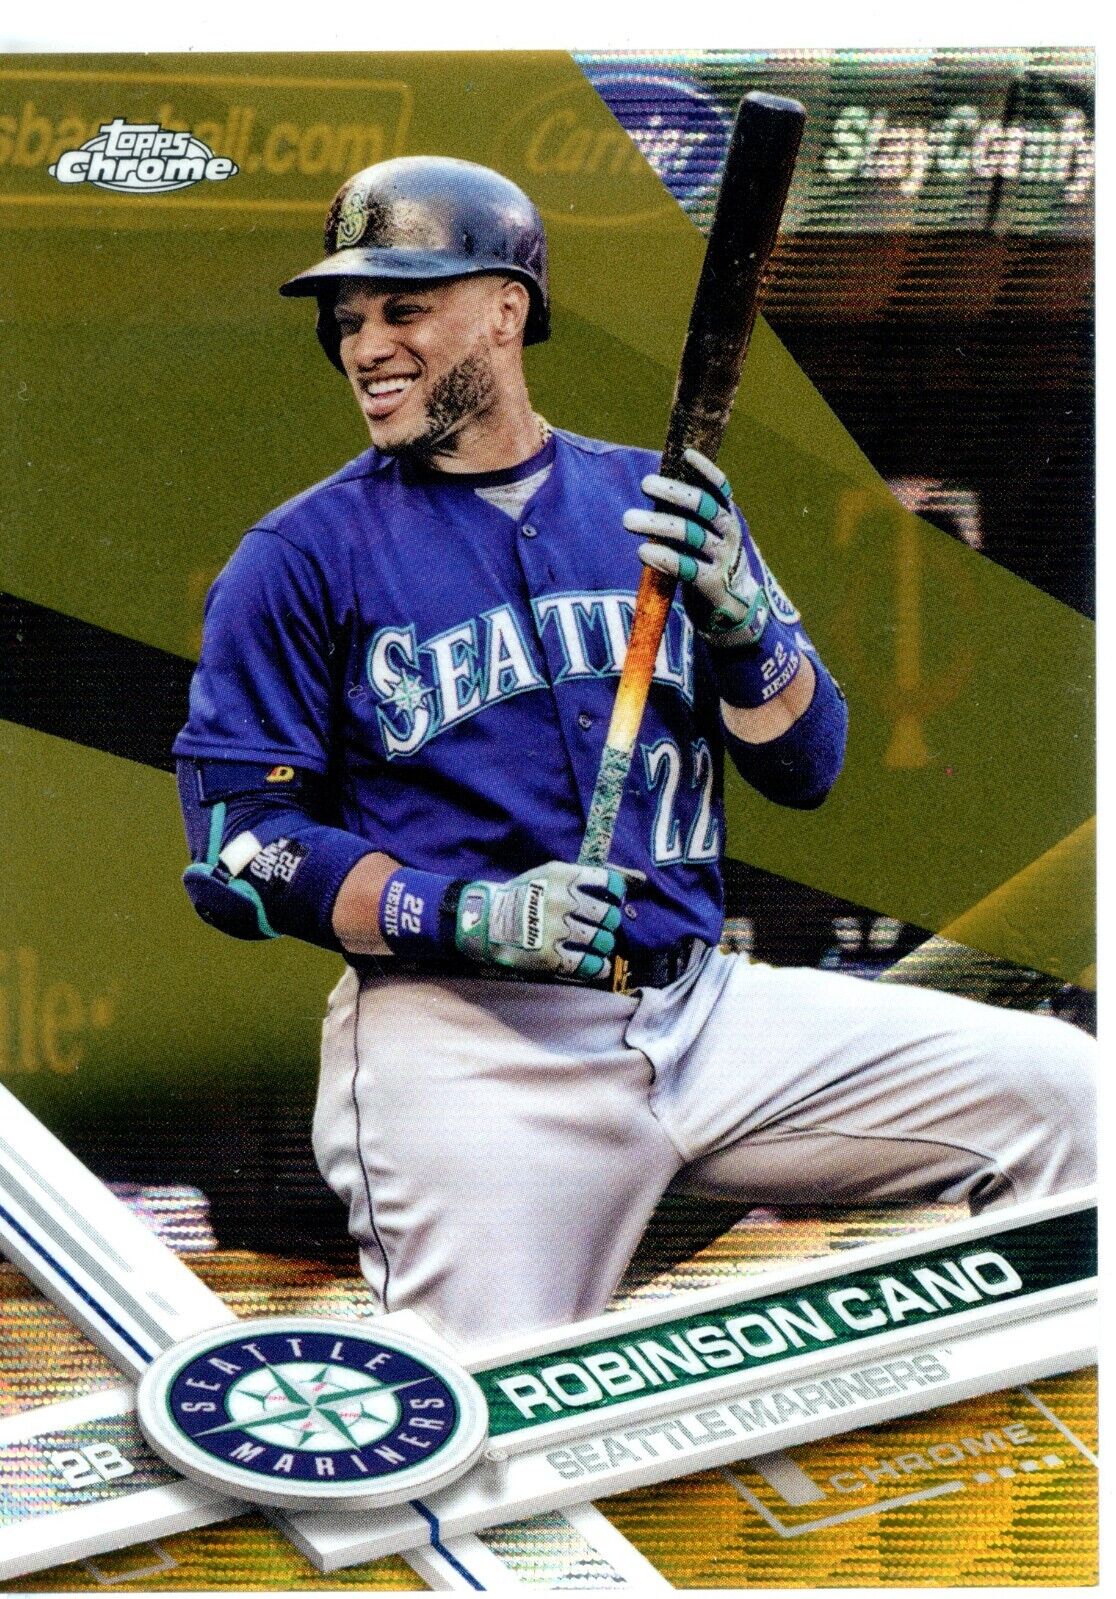 2017 Topps Chrome Gold Wave Refractor #90 ROBINSON CANO Mariners 08/50